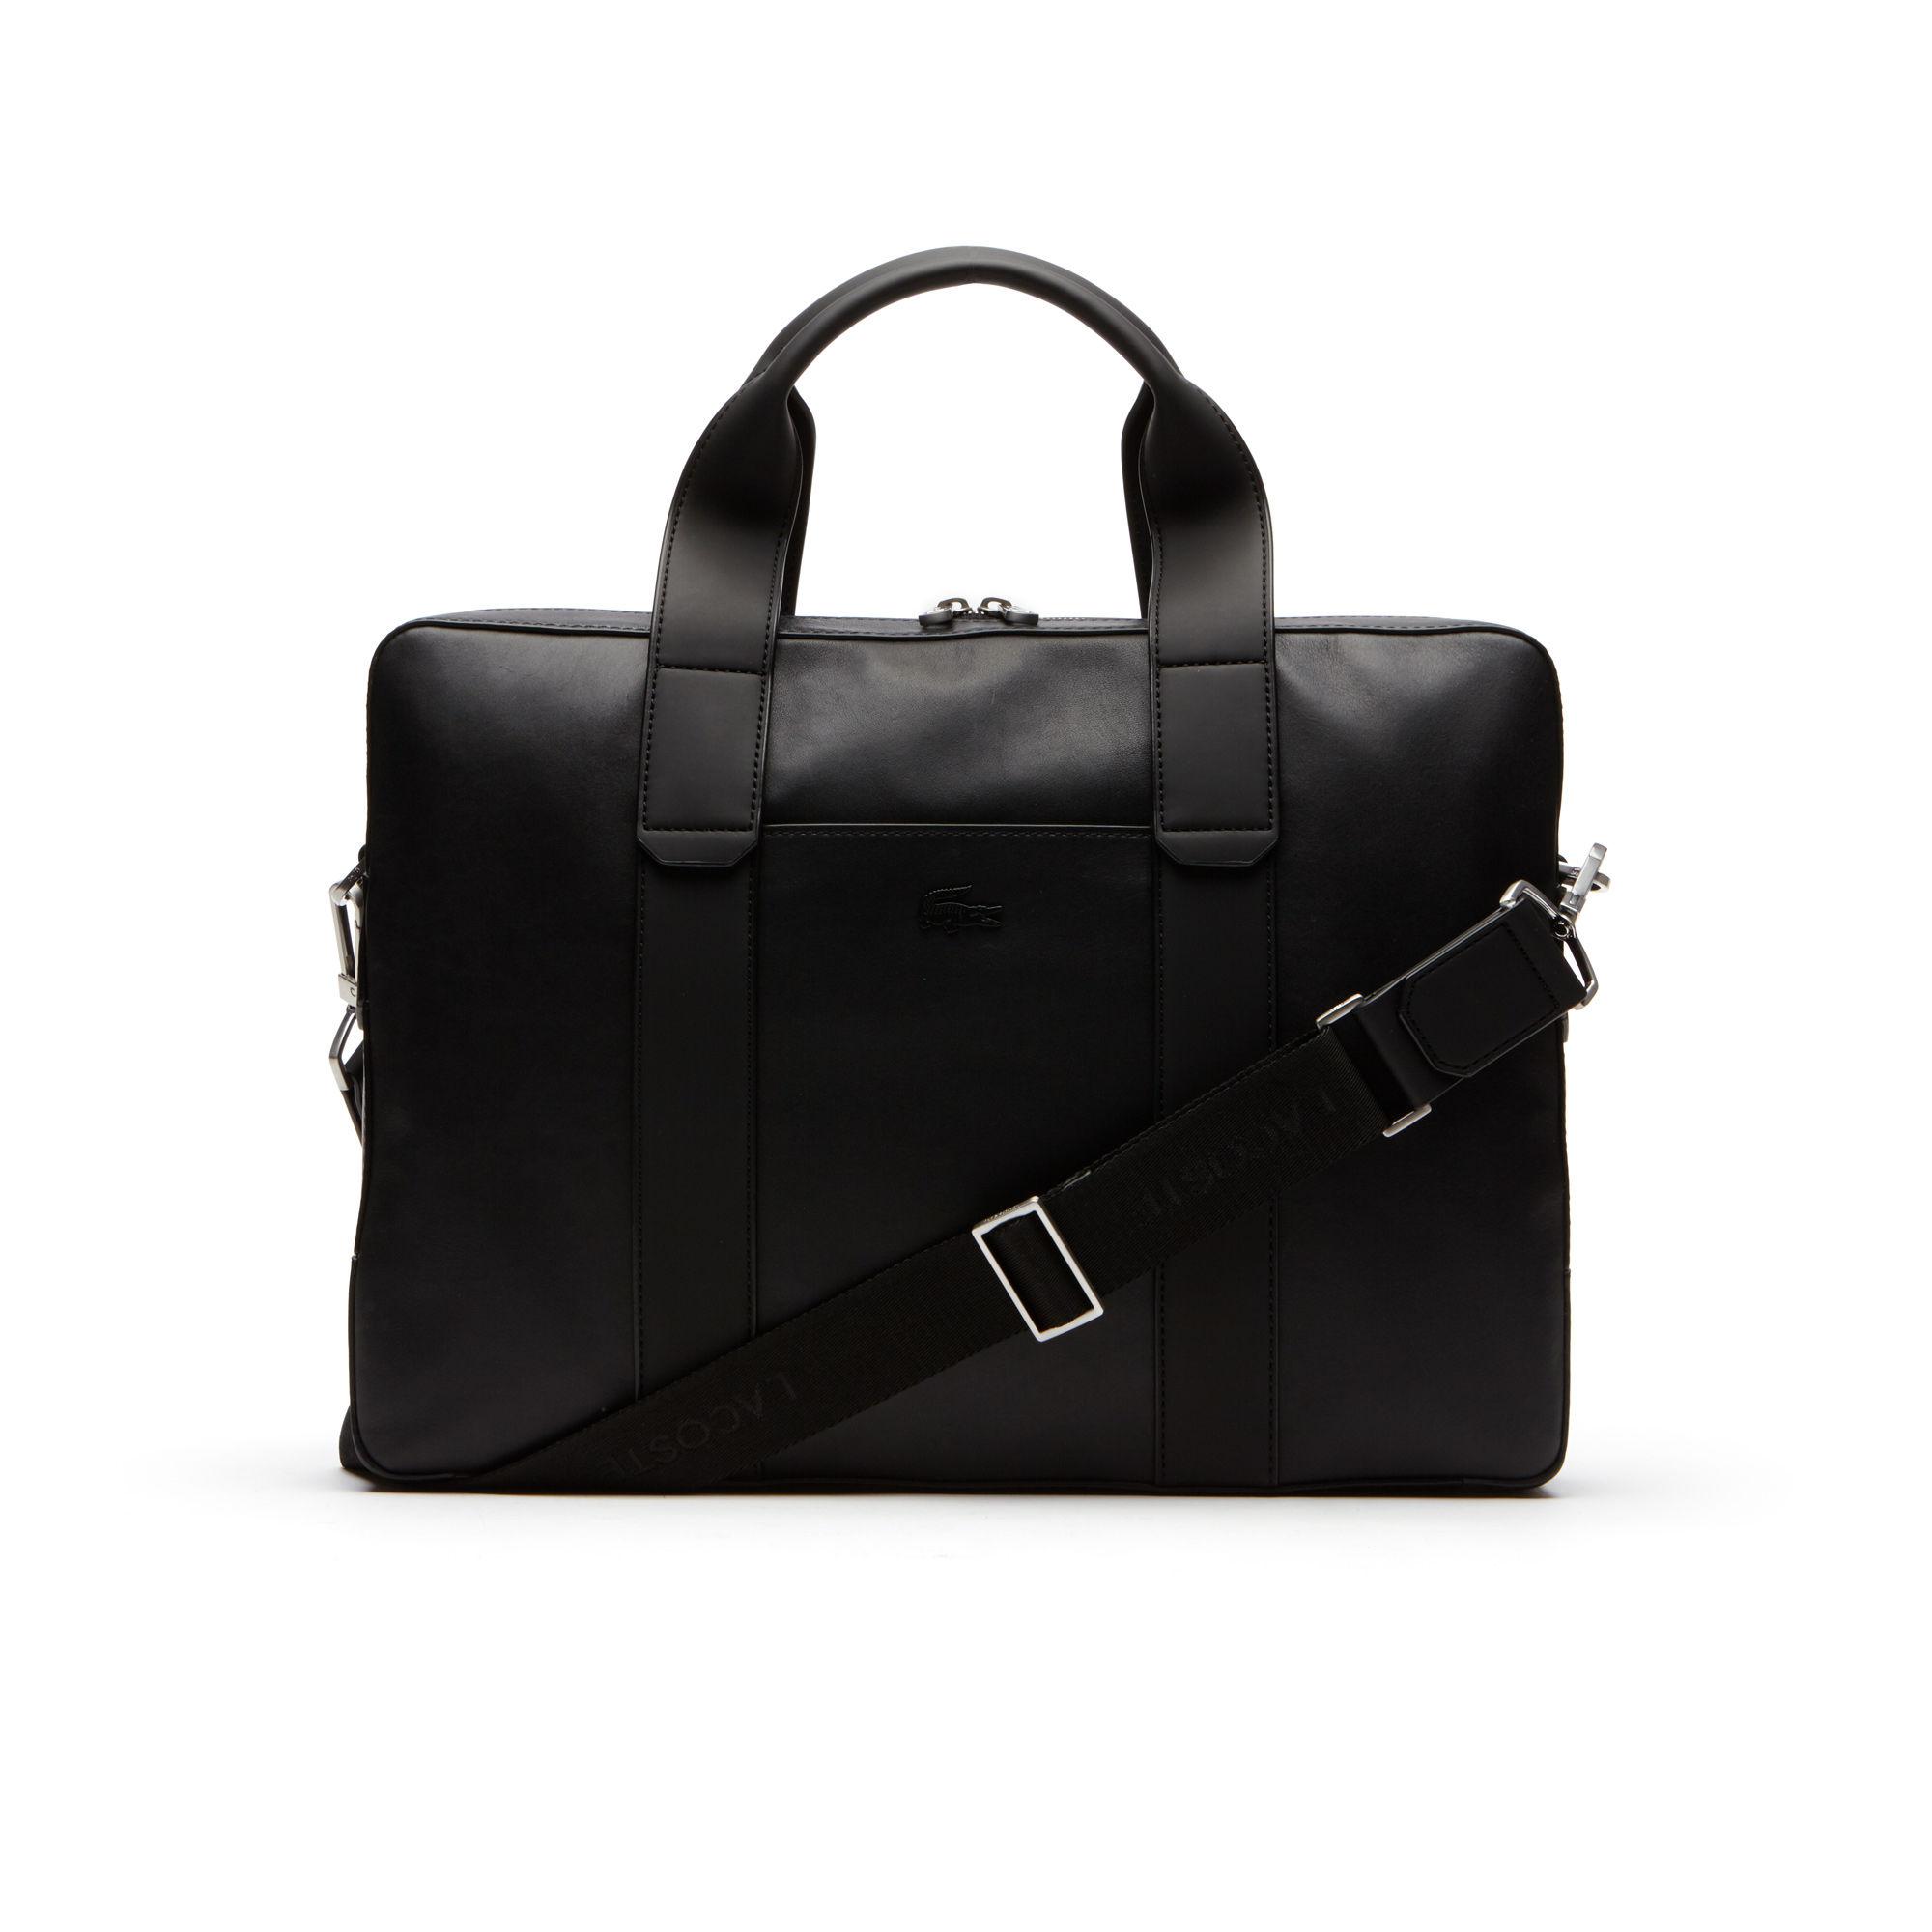 Lacoste Full Ace Soft Leather Computer Bag in Black for Men - Lyst